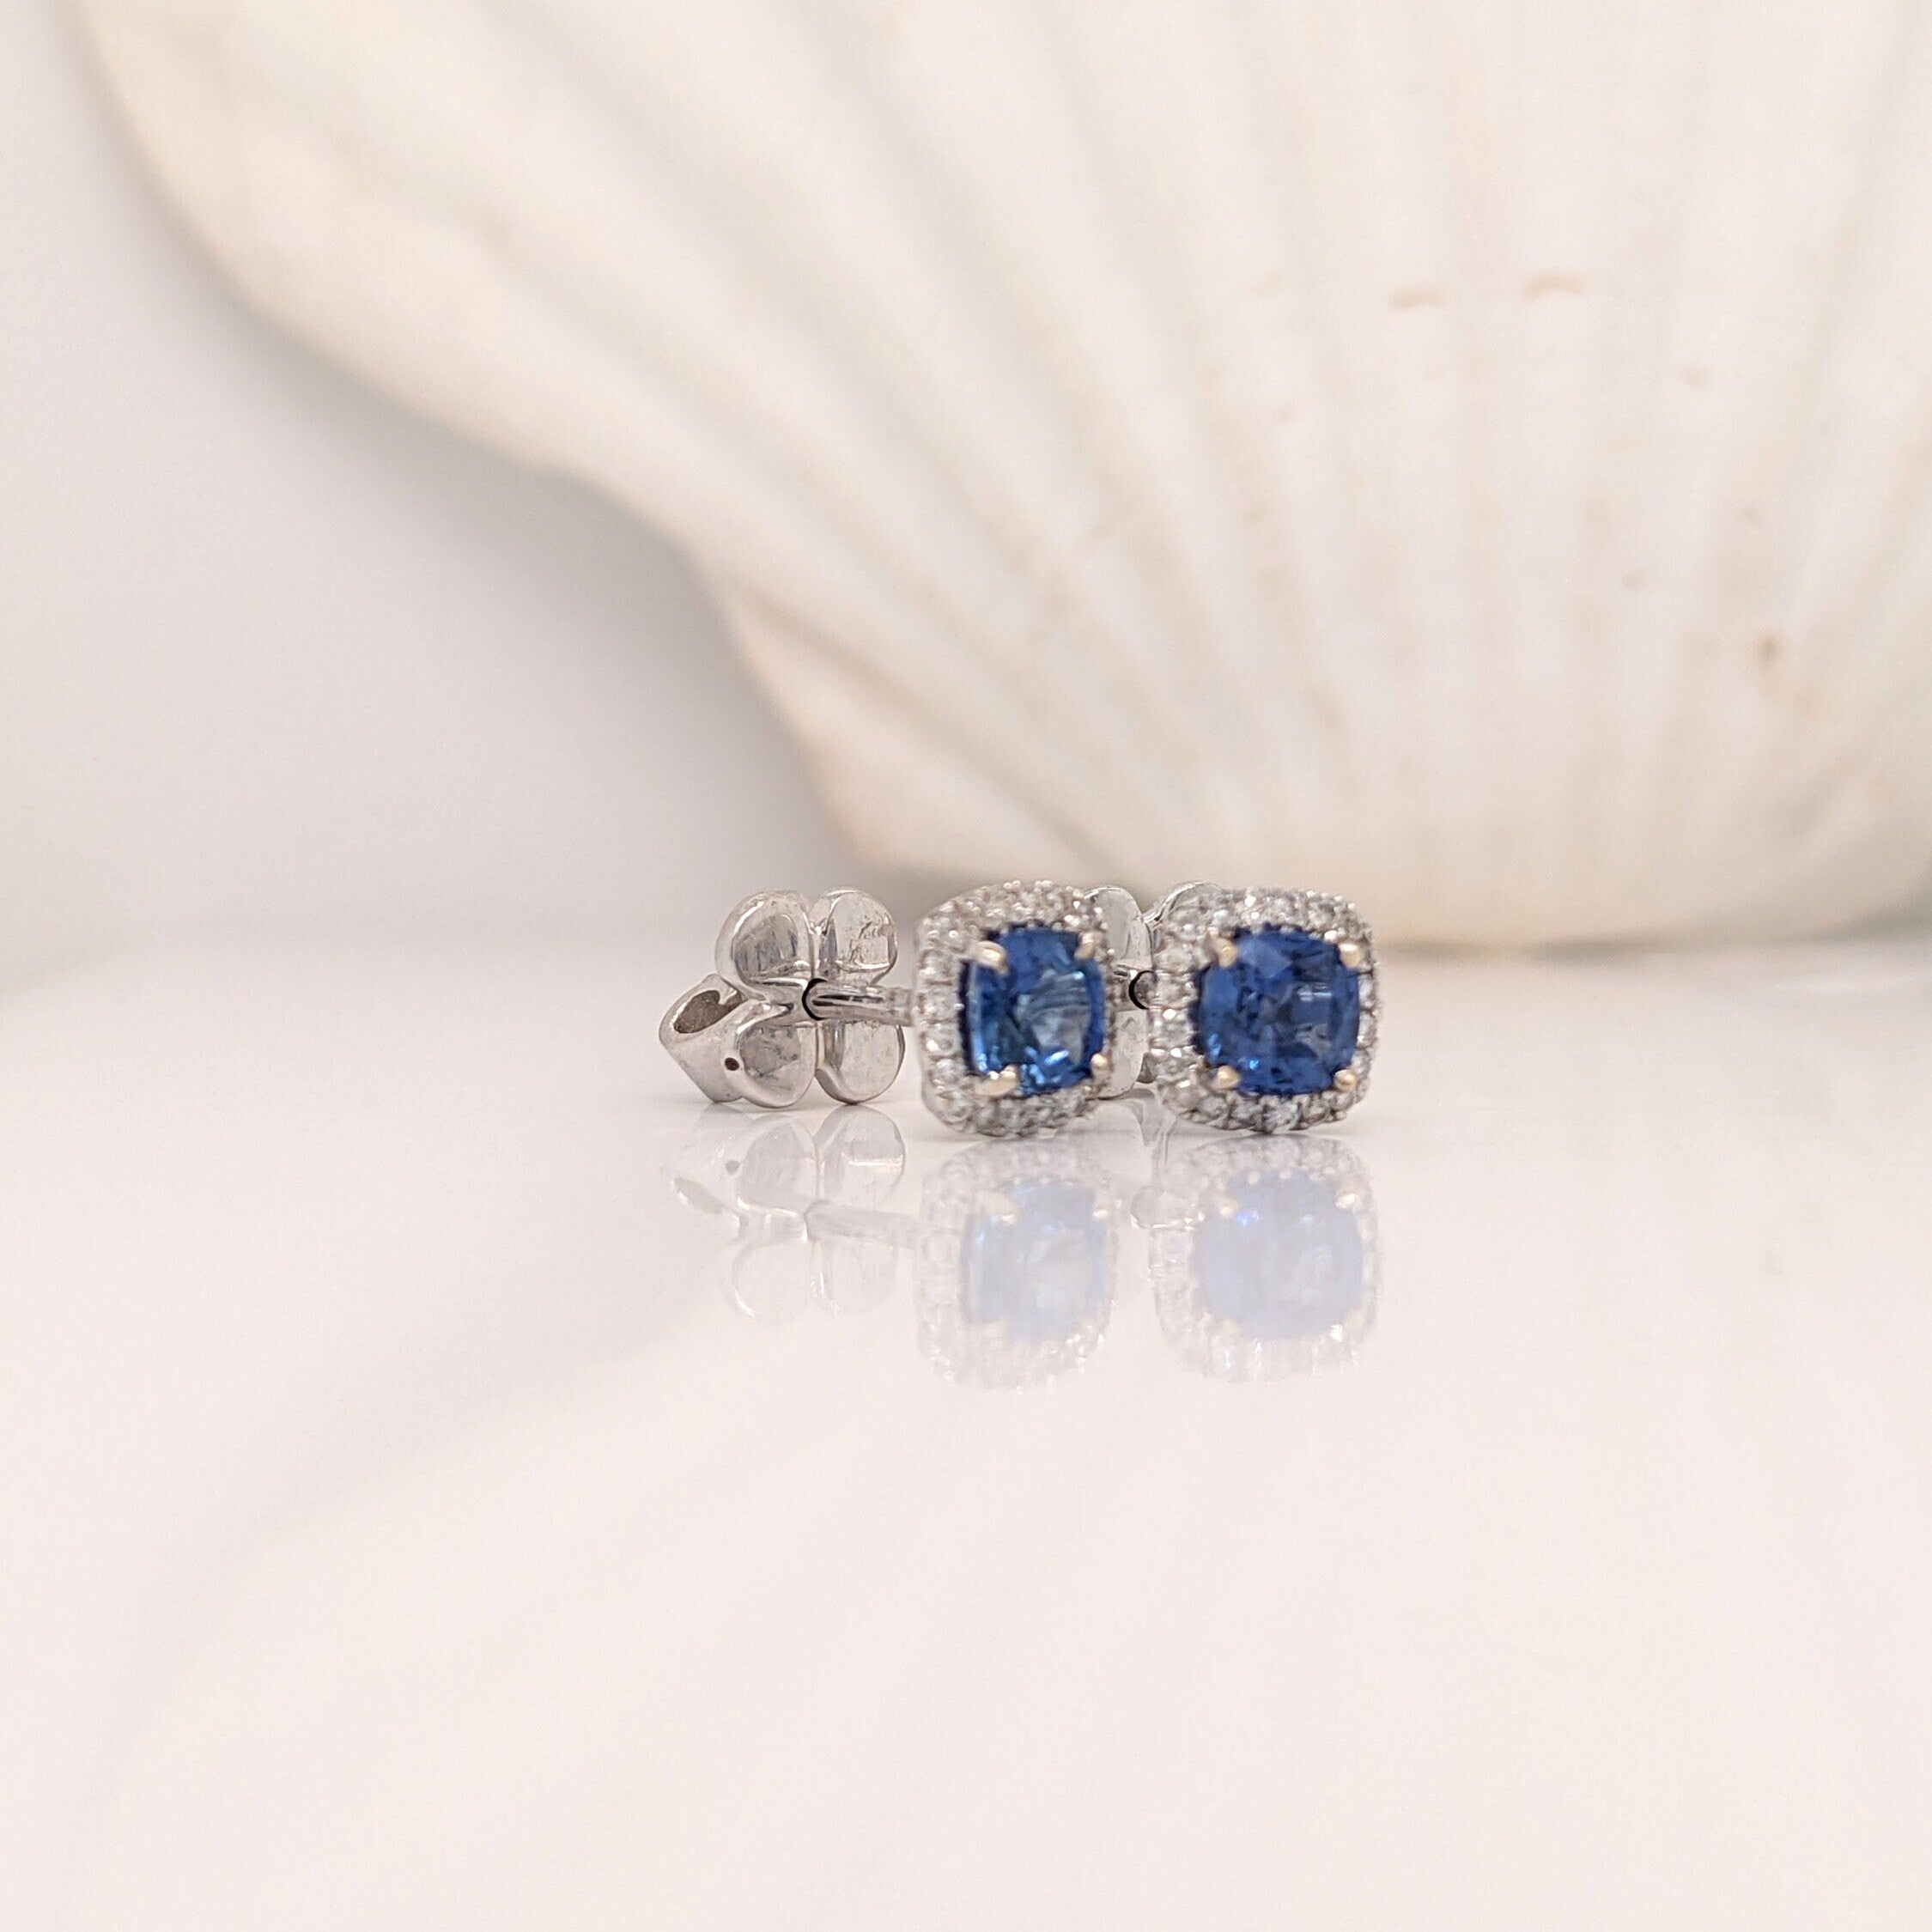 Beautiful Blue Sapphire Stud Earrings with a Natural Diamond Halo in Solid 14k White Gold | Pushback | September Birthstone | Elegant Look